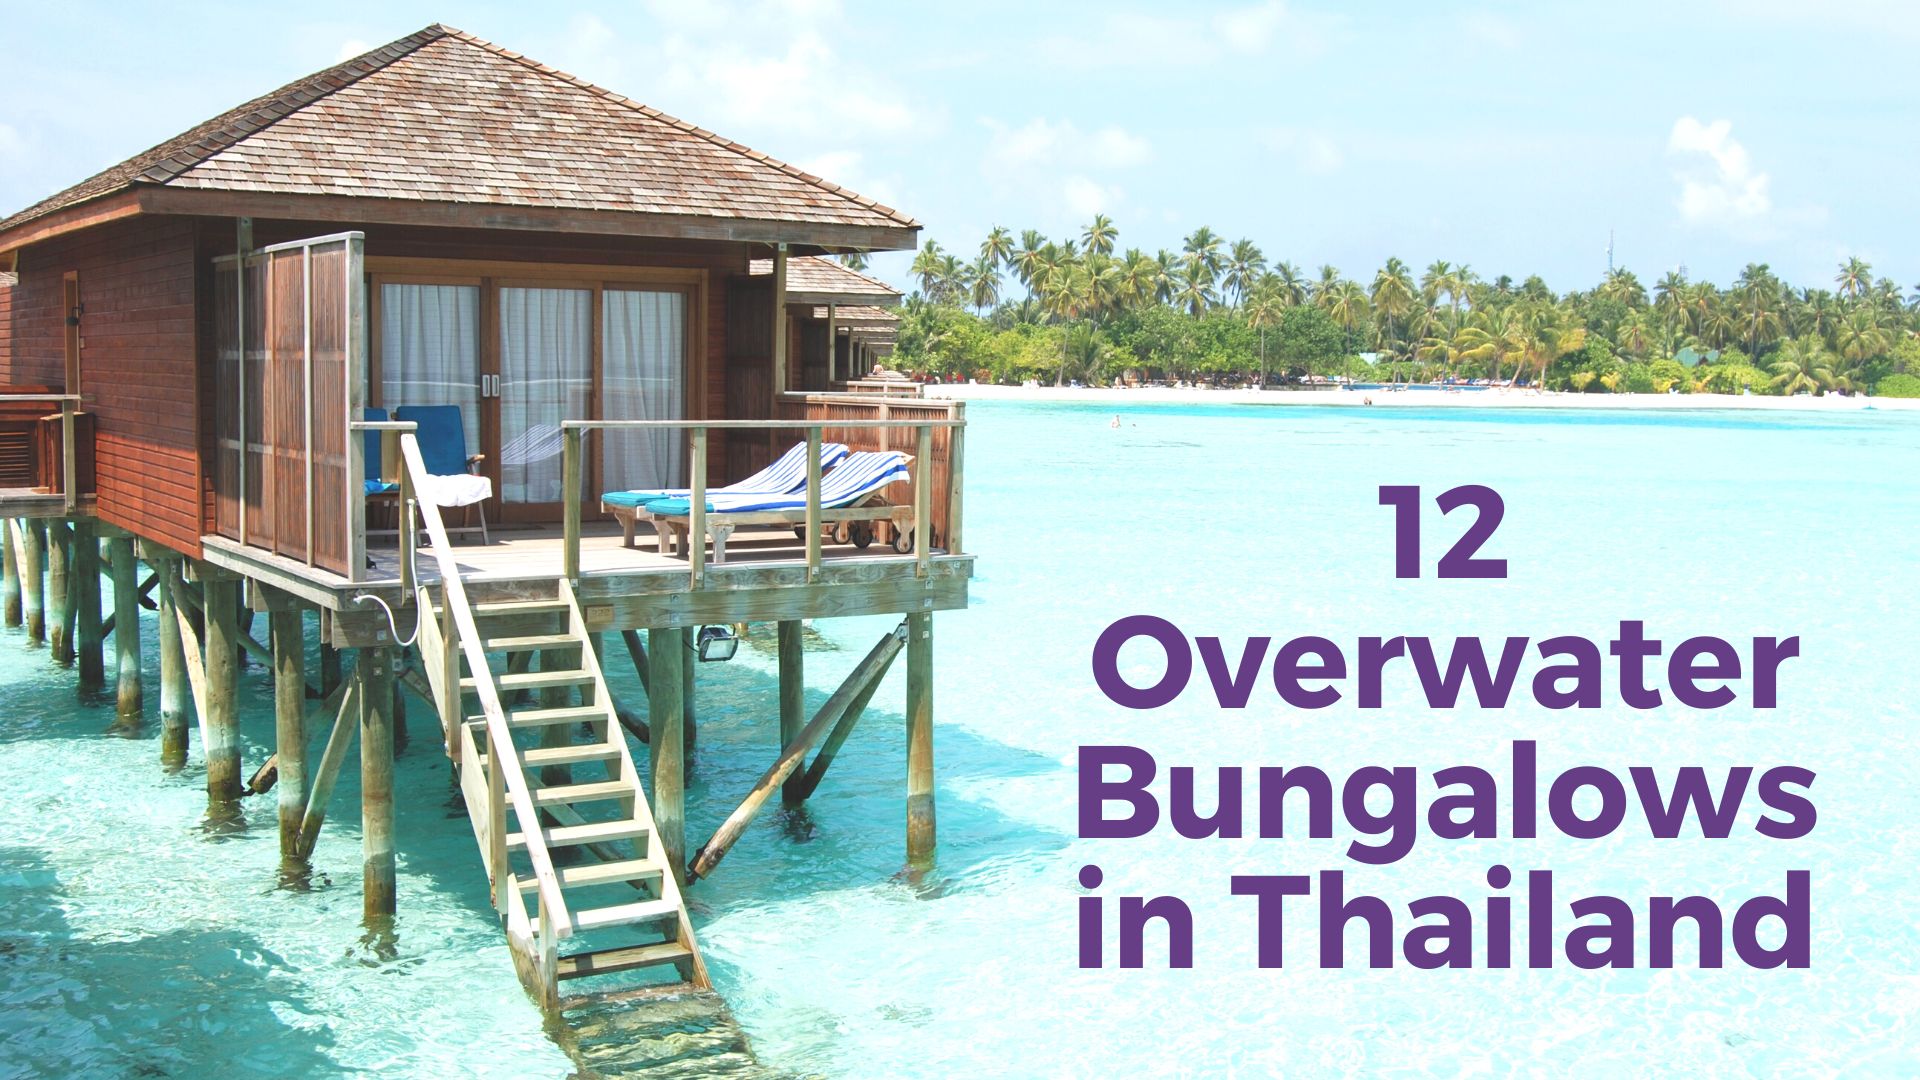 12 Awesome overwater bungalows in Thailand, floating villas in Thailand, overwater bungalows for honeymoons in Thailand, Khao Sok National Park floating bungalows, River Kwai floating villas, overwater villas in Thailand